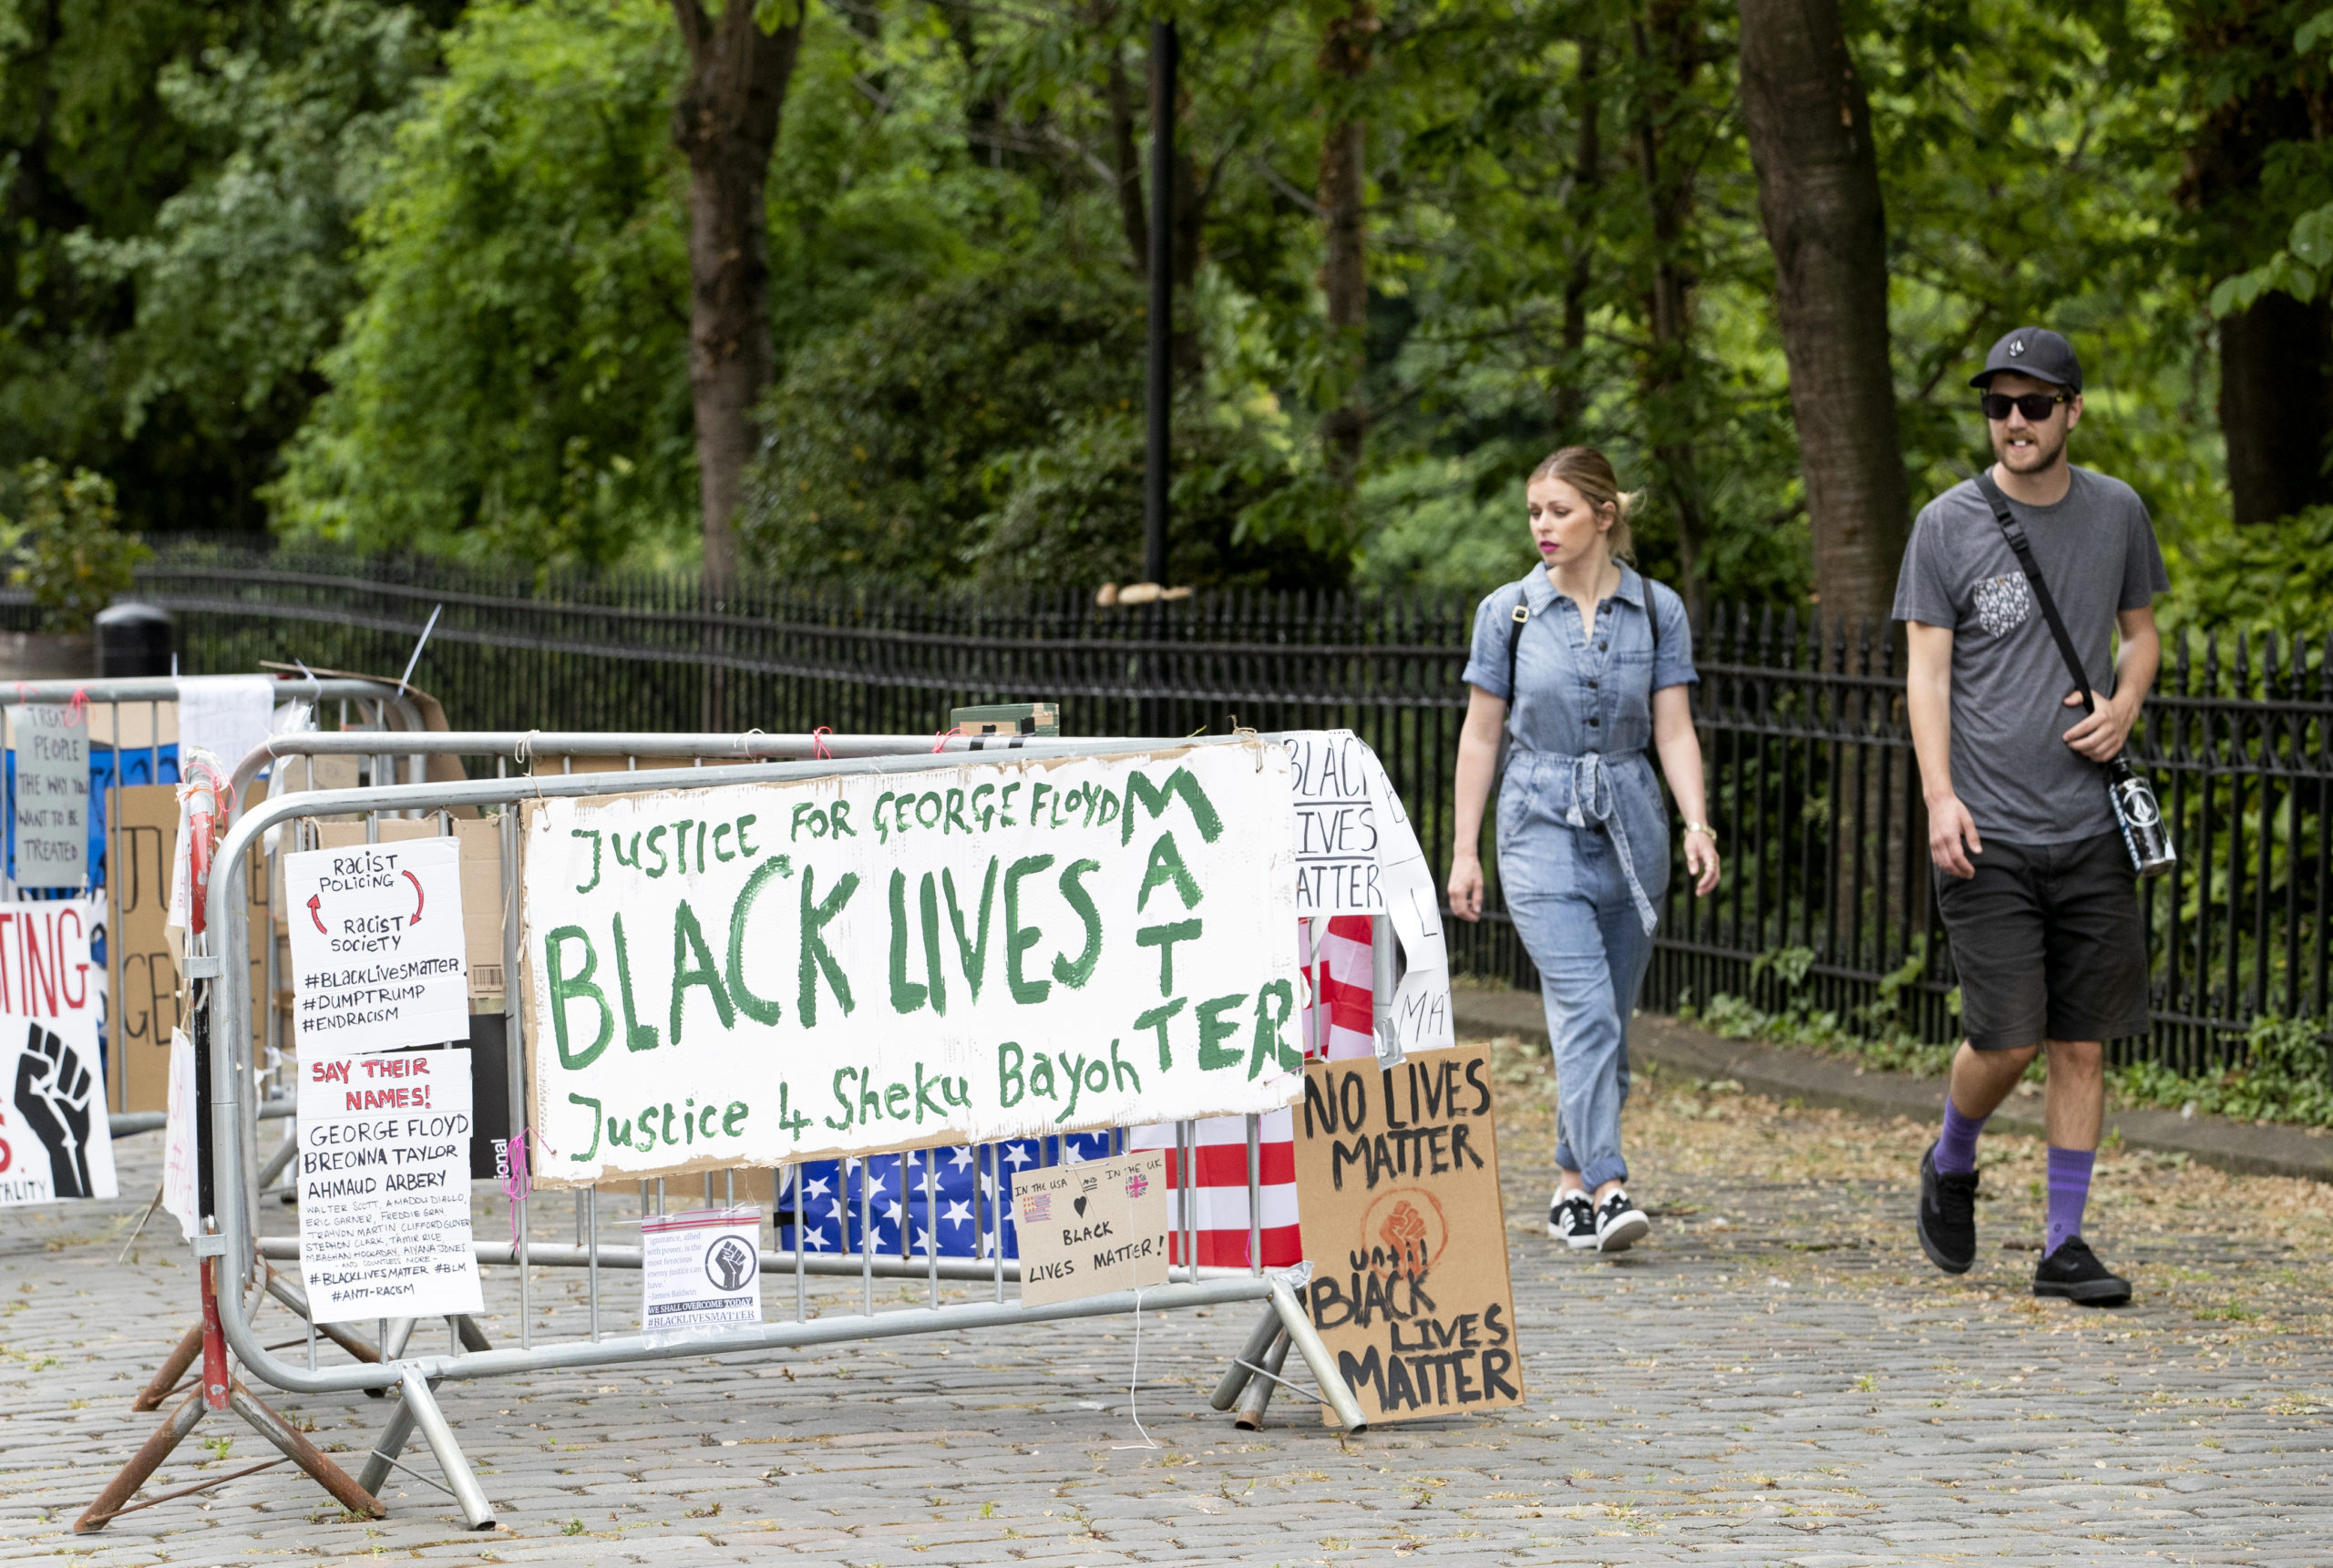 Protest posters outside the US Consulate General office in Edinburgh in response to the police killing of George Floyd in the US